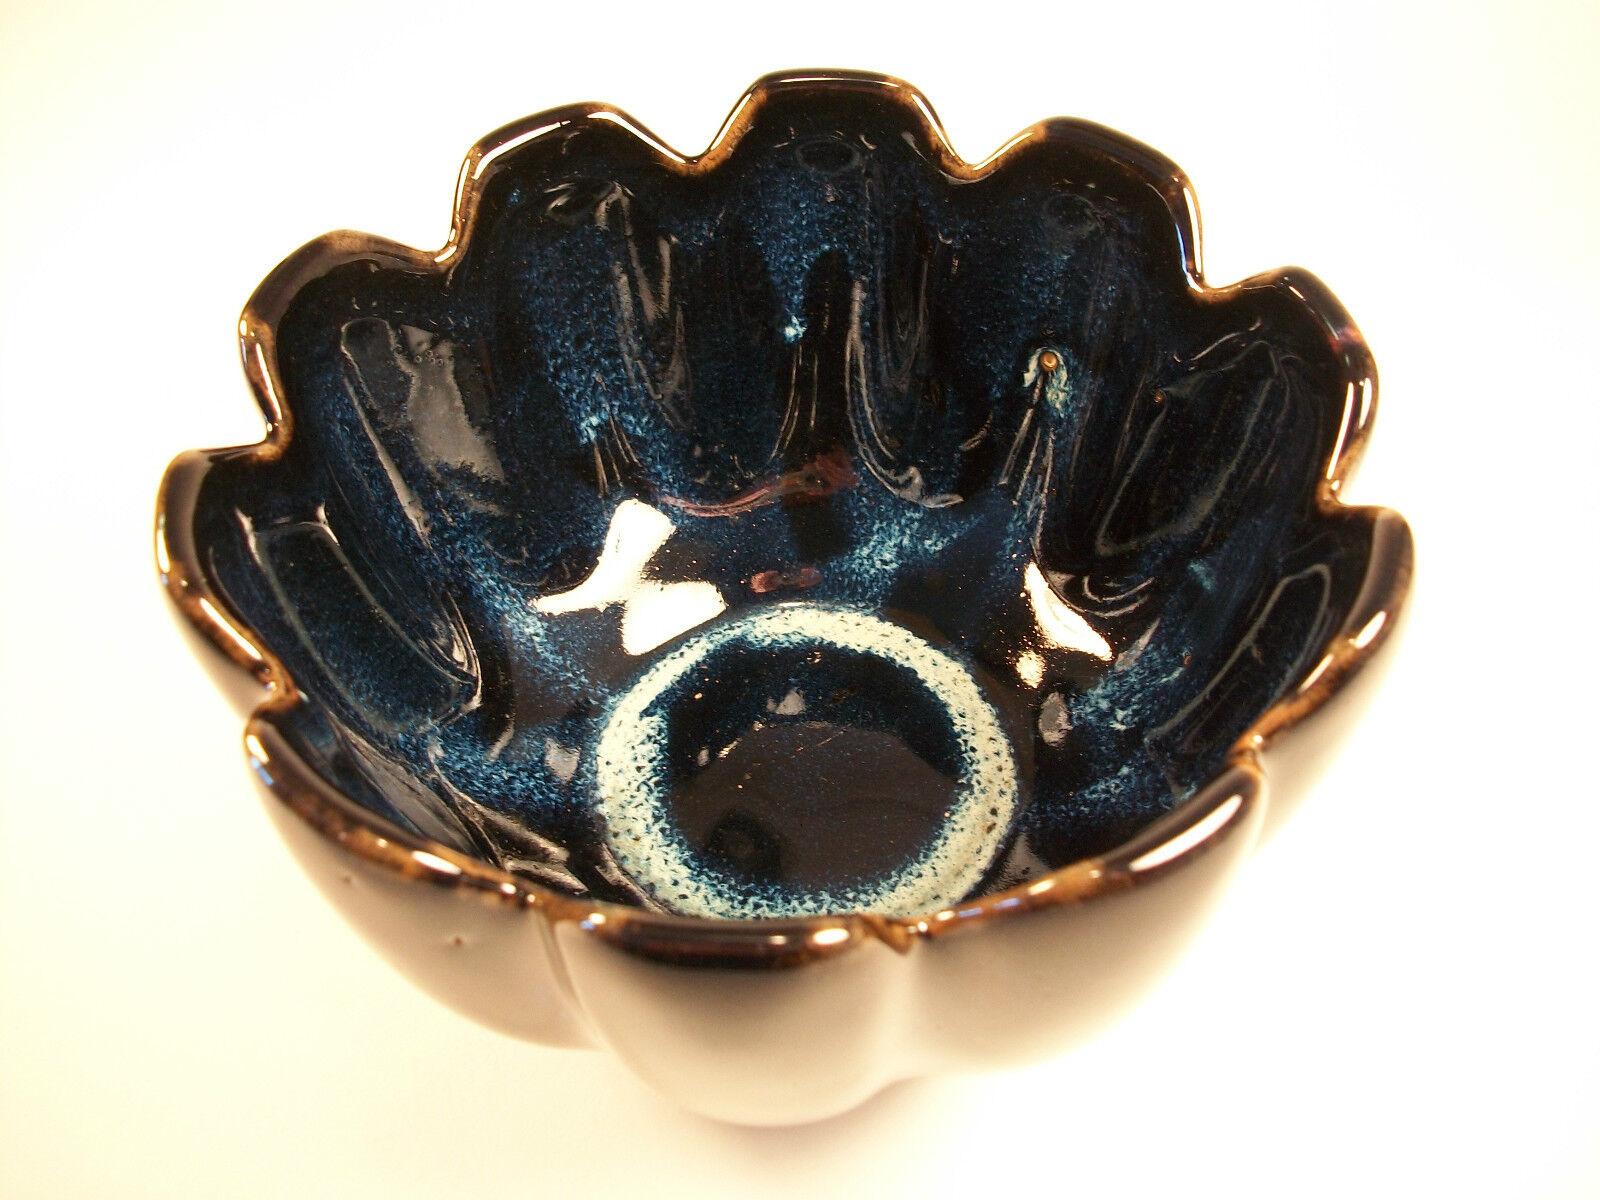 Vintage lotus form ceramic bowl - blue flambe glaze - non glazed foot rim - unsigned - China - late 20th century.

Excellent vintage condition - no chips - no cracks - no loss - no restoration - minor surface scratches from age and use.

Size -